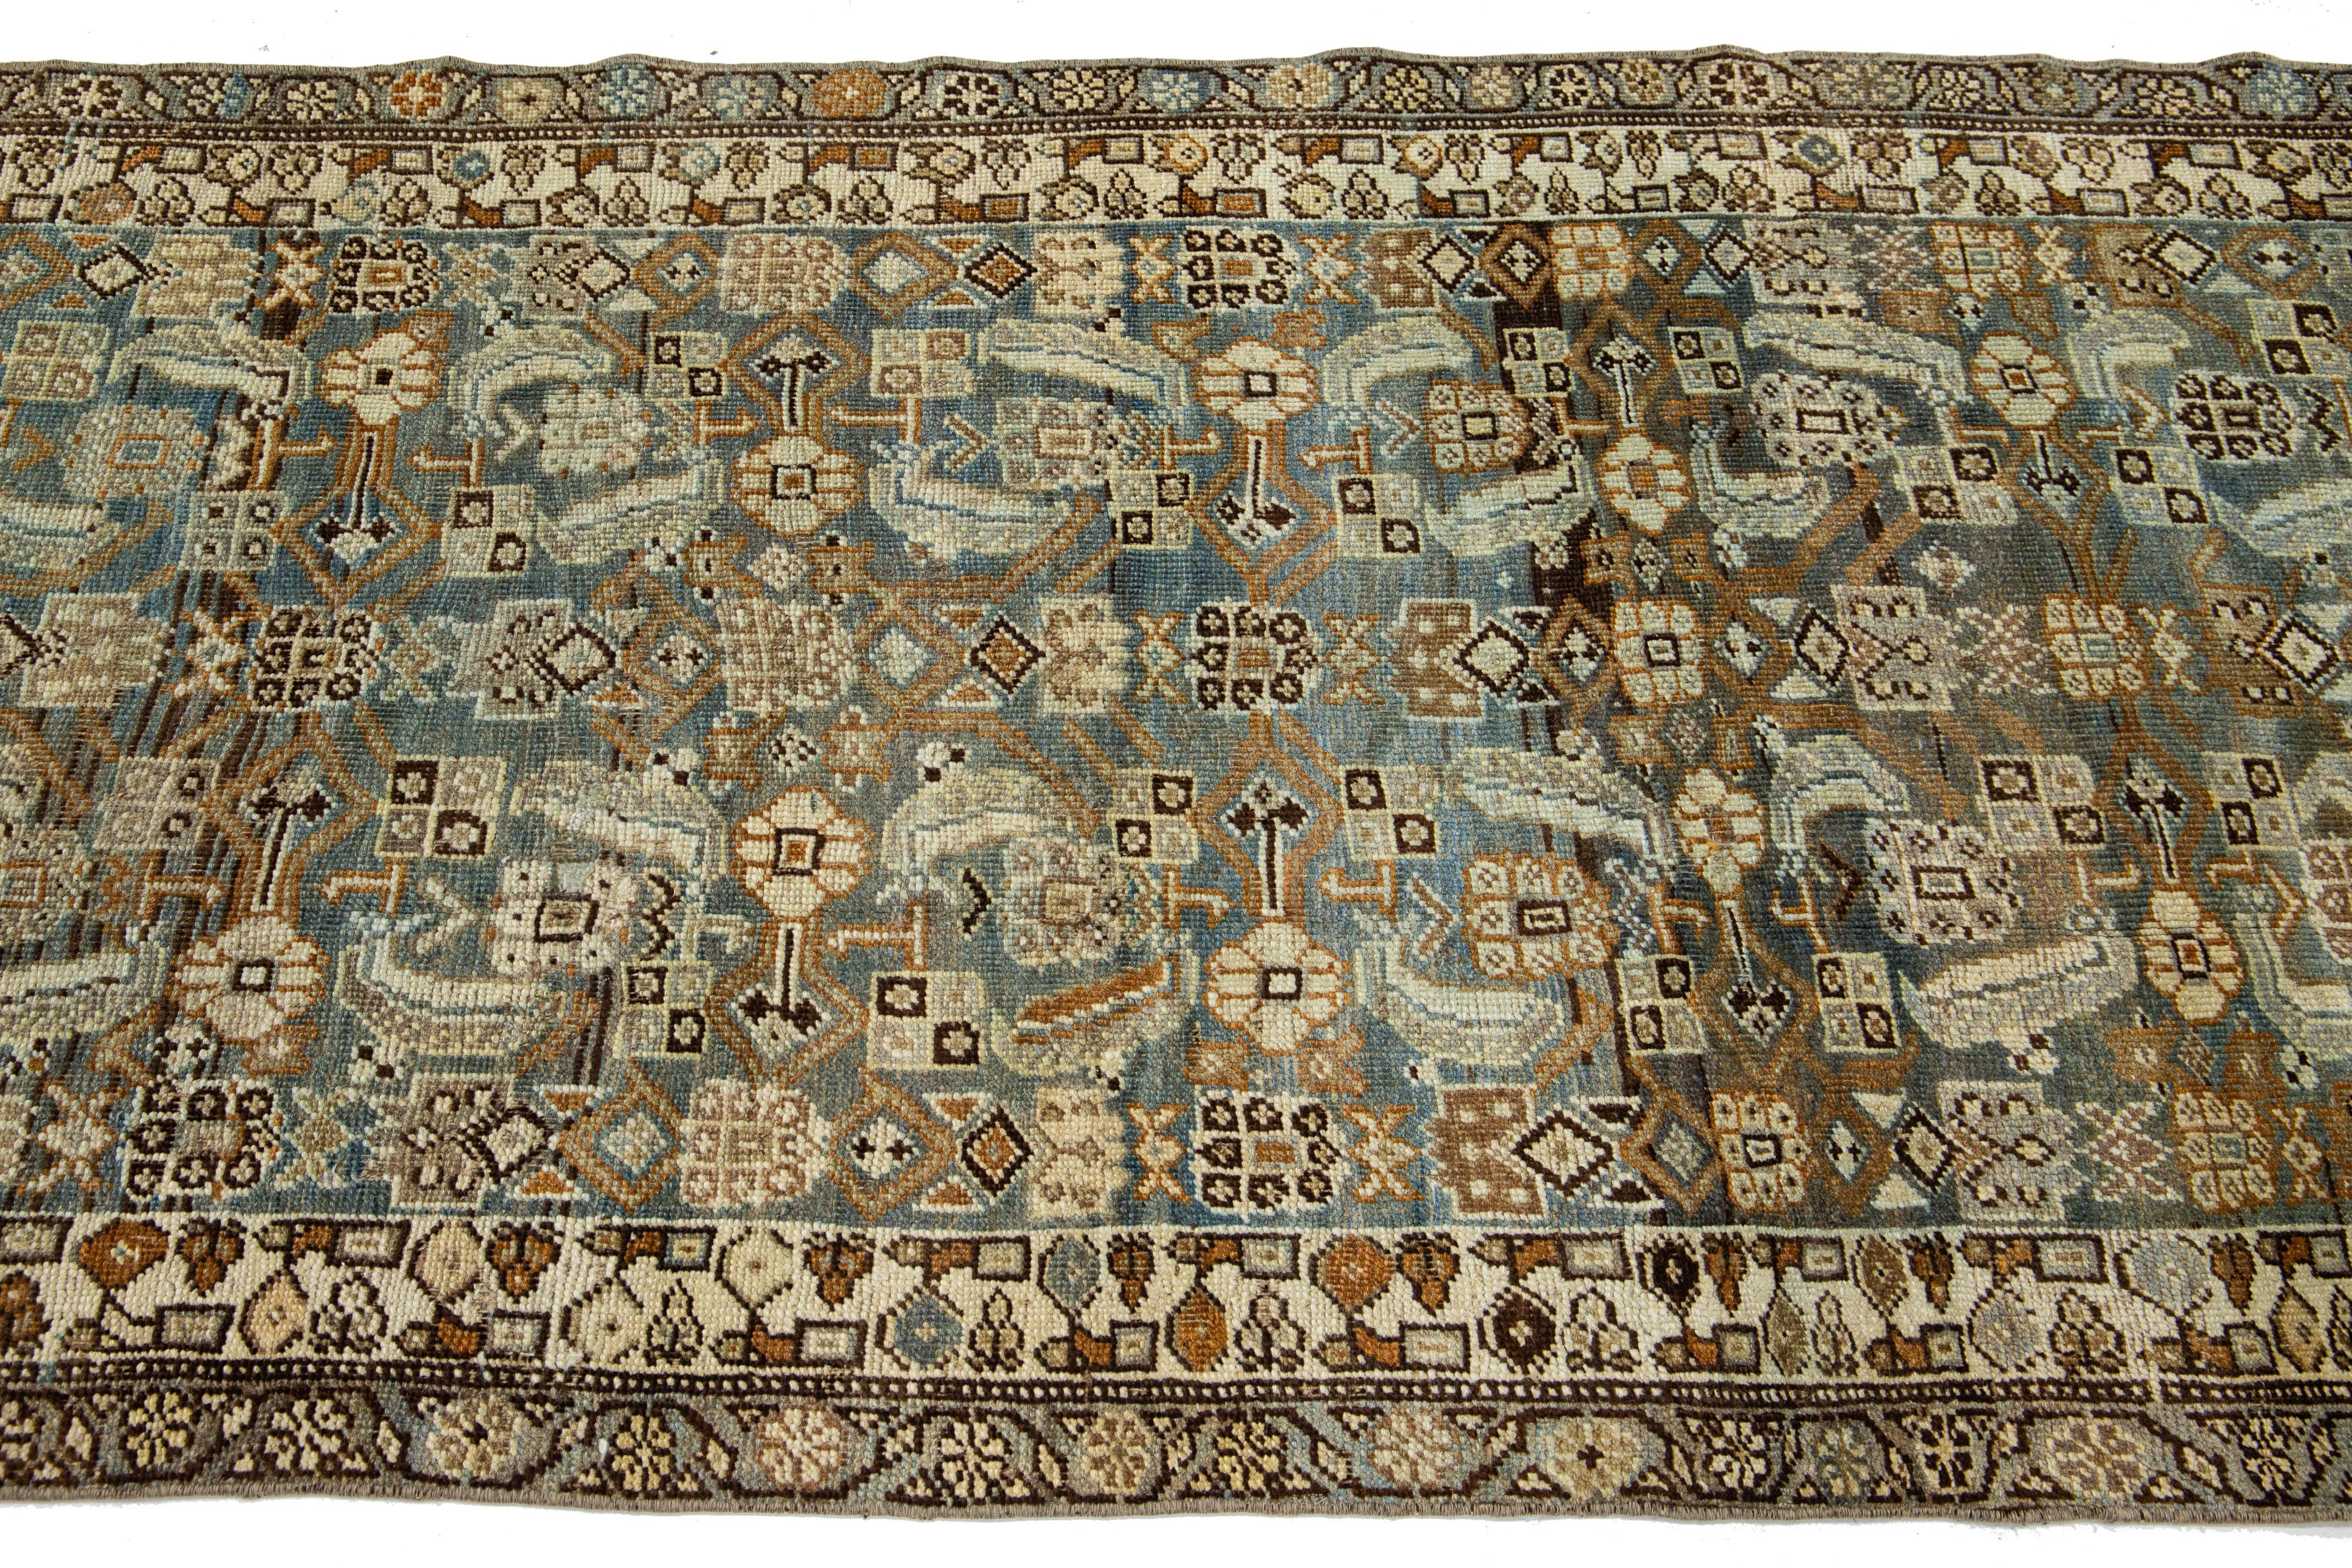 Allover Antique Persian Bidjar Handmade Wool Runner In Brown And Blue In Good Condition For Sale In Norwalk, CT